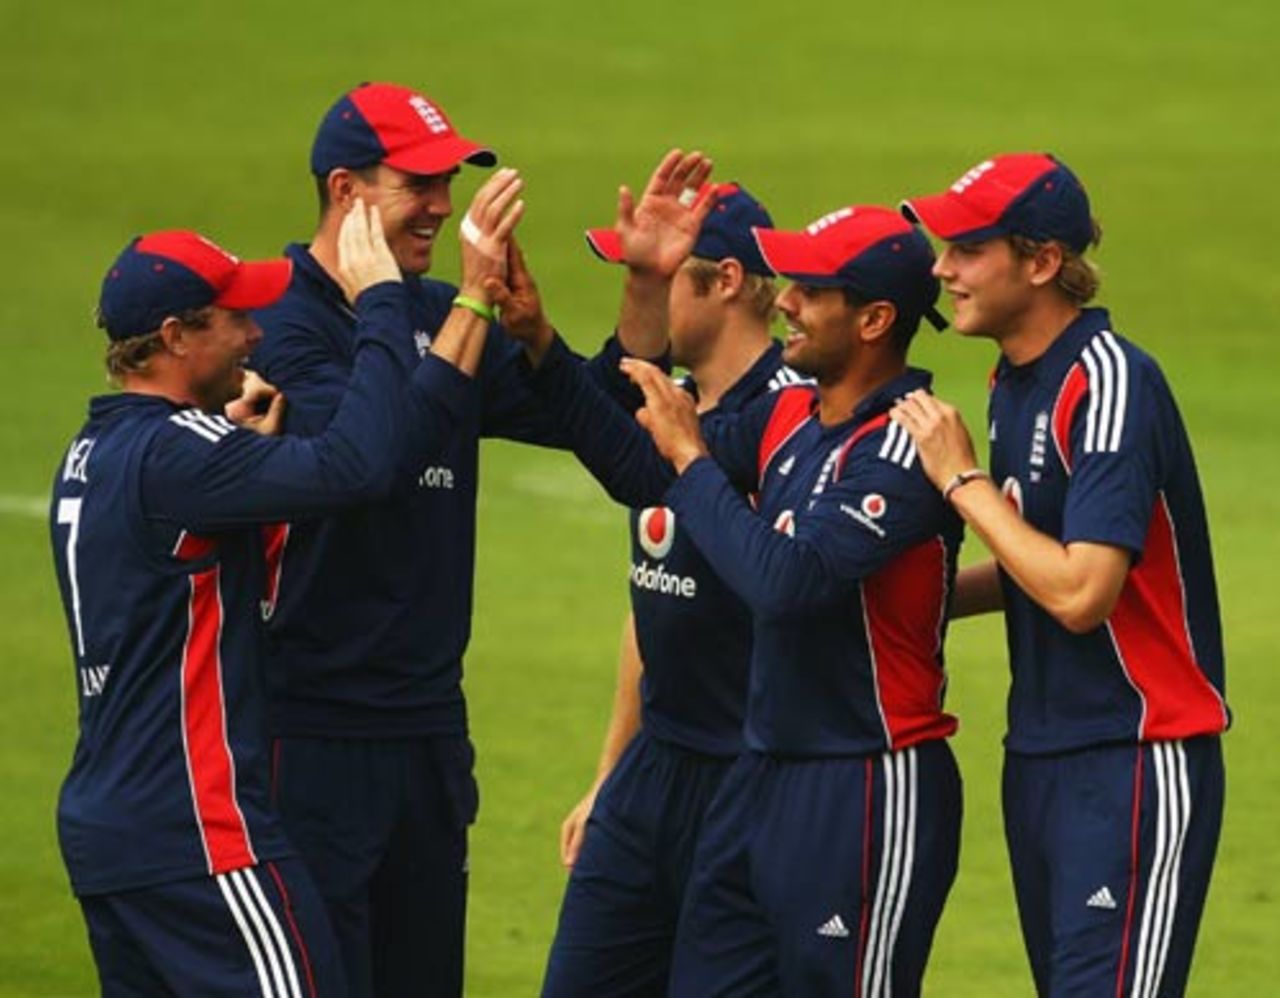 Owais Shah is congratulated on running out Hashim Amla, England v South Africa, 4th ODI, Lord's, August 31, 2008